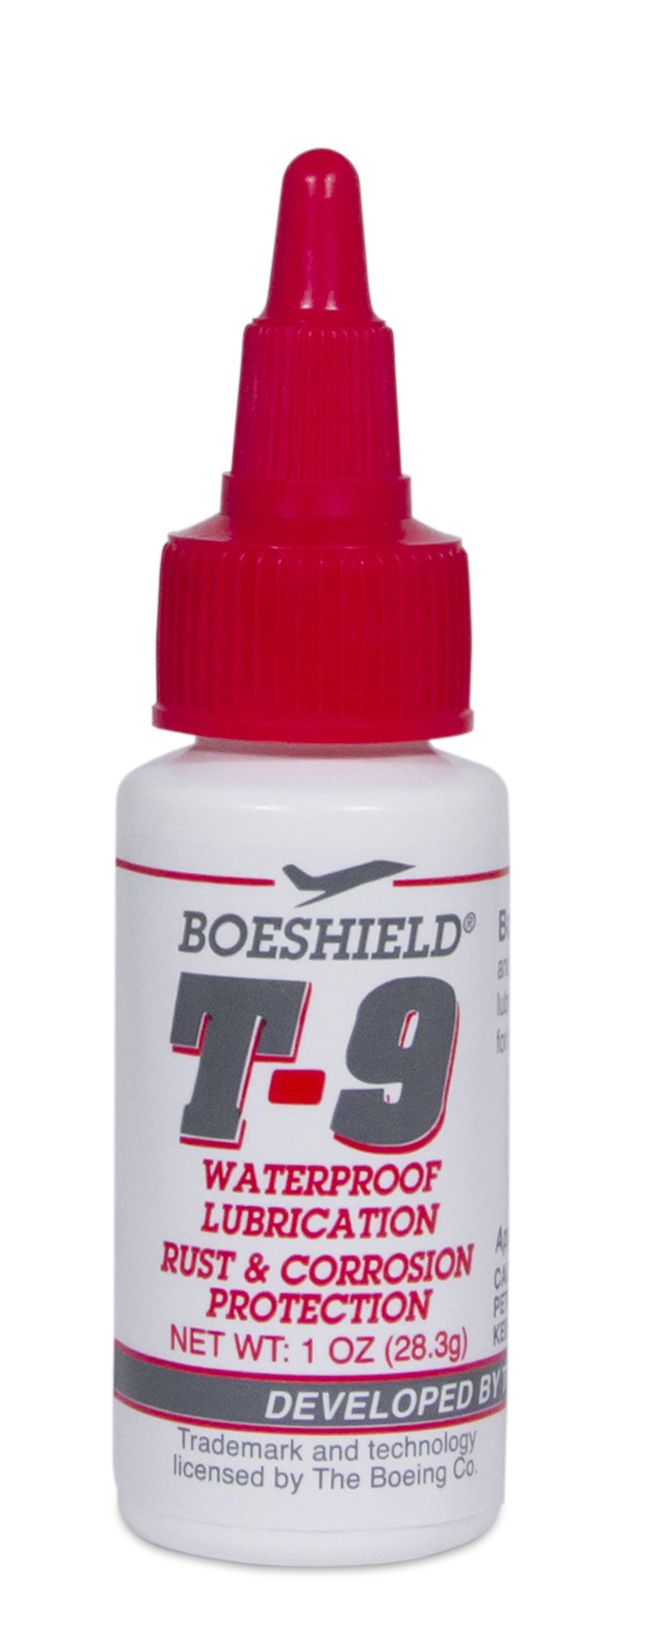 Rust and Corrosion Protection/Waterproof Lubrication | Boeshield T-9®